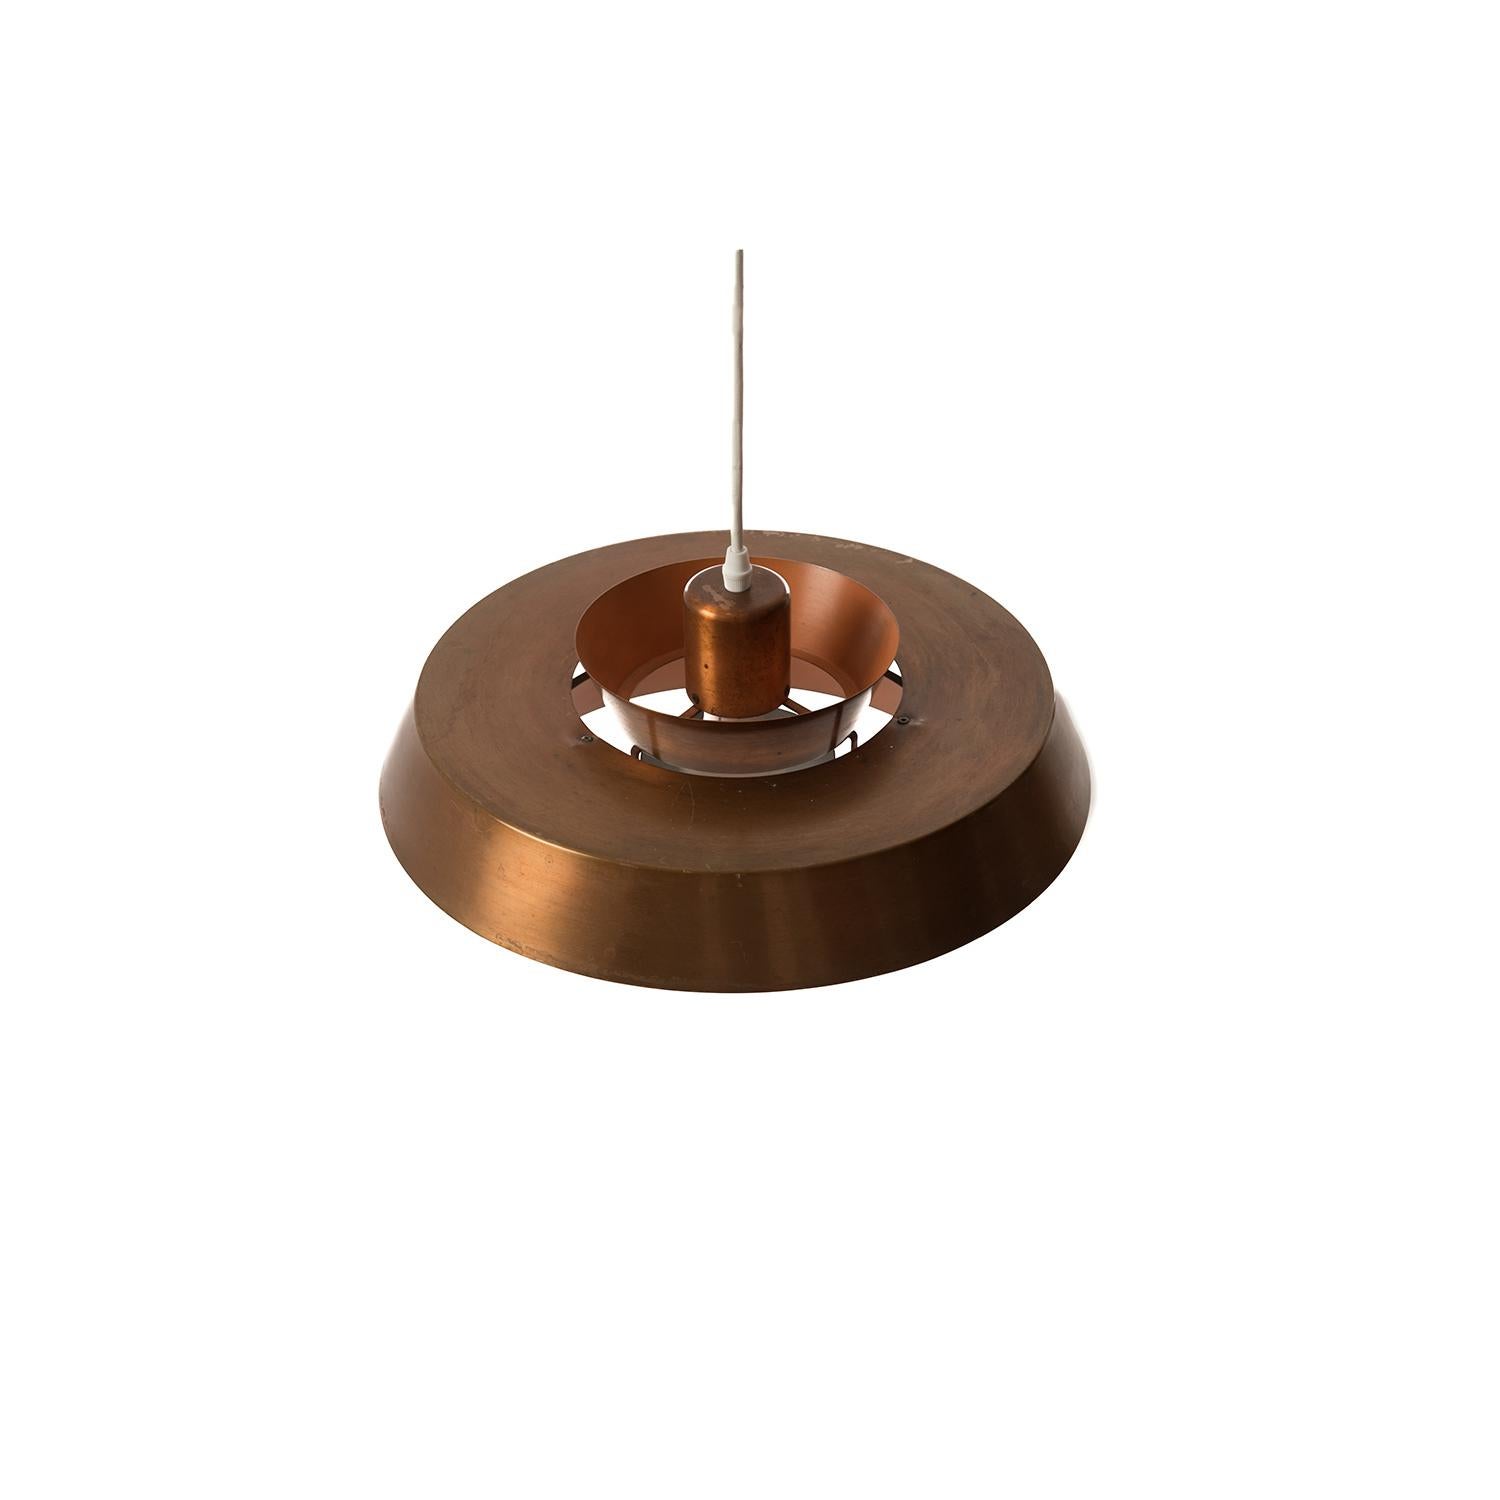 Multi-tier pendant fixture in patinated copper, casts a warm glow in any space, so cool season, and so much more emotionally satisfying than a pumpkin spice latte! This pendant has been updated with North American socket and wiring.